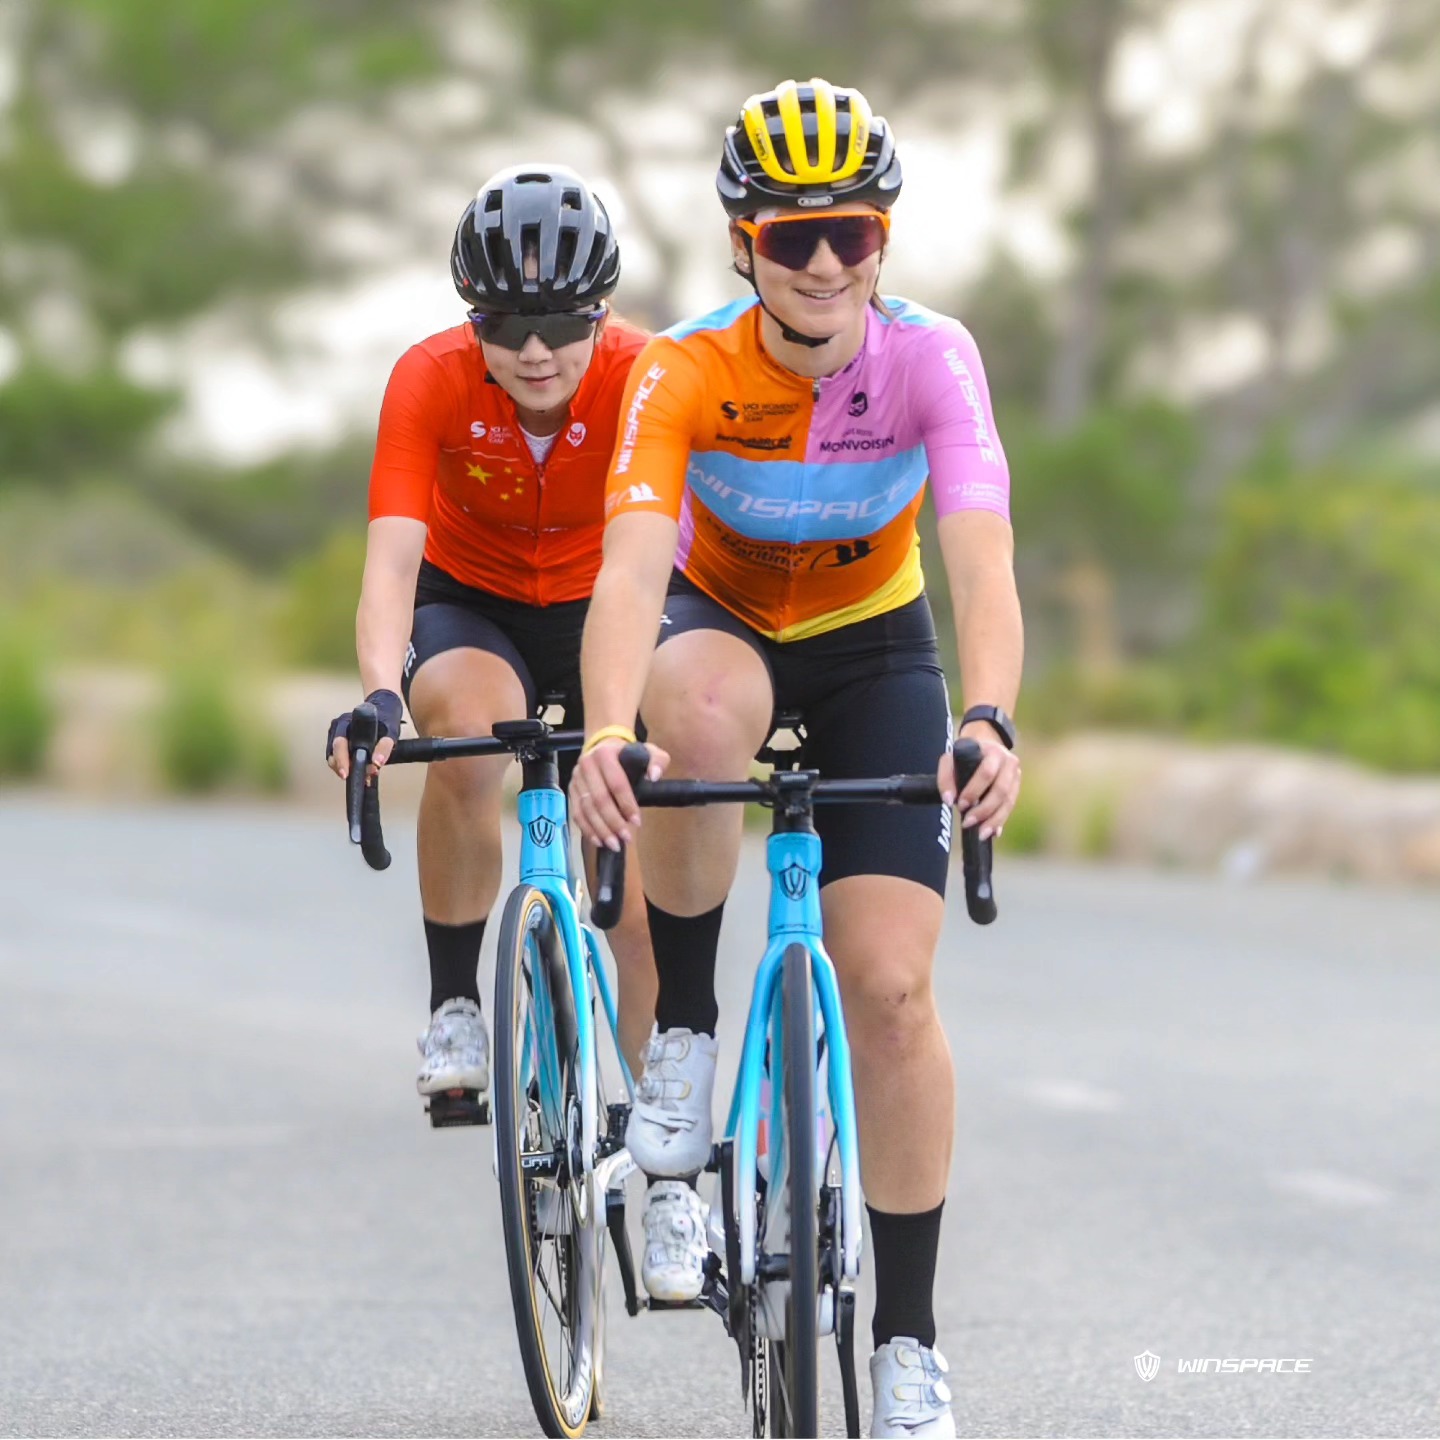 Luyao Zeng rides with a Winspace teammate while training. She has the bright red jersey of Chinese national champion, with the yellow stars of its flag.